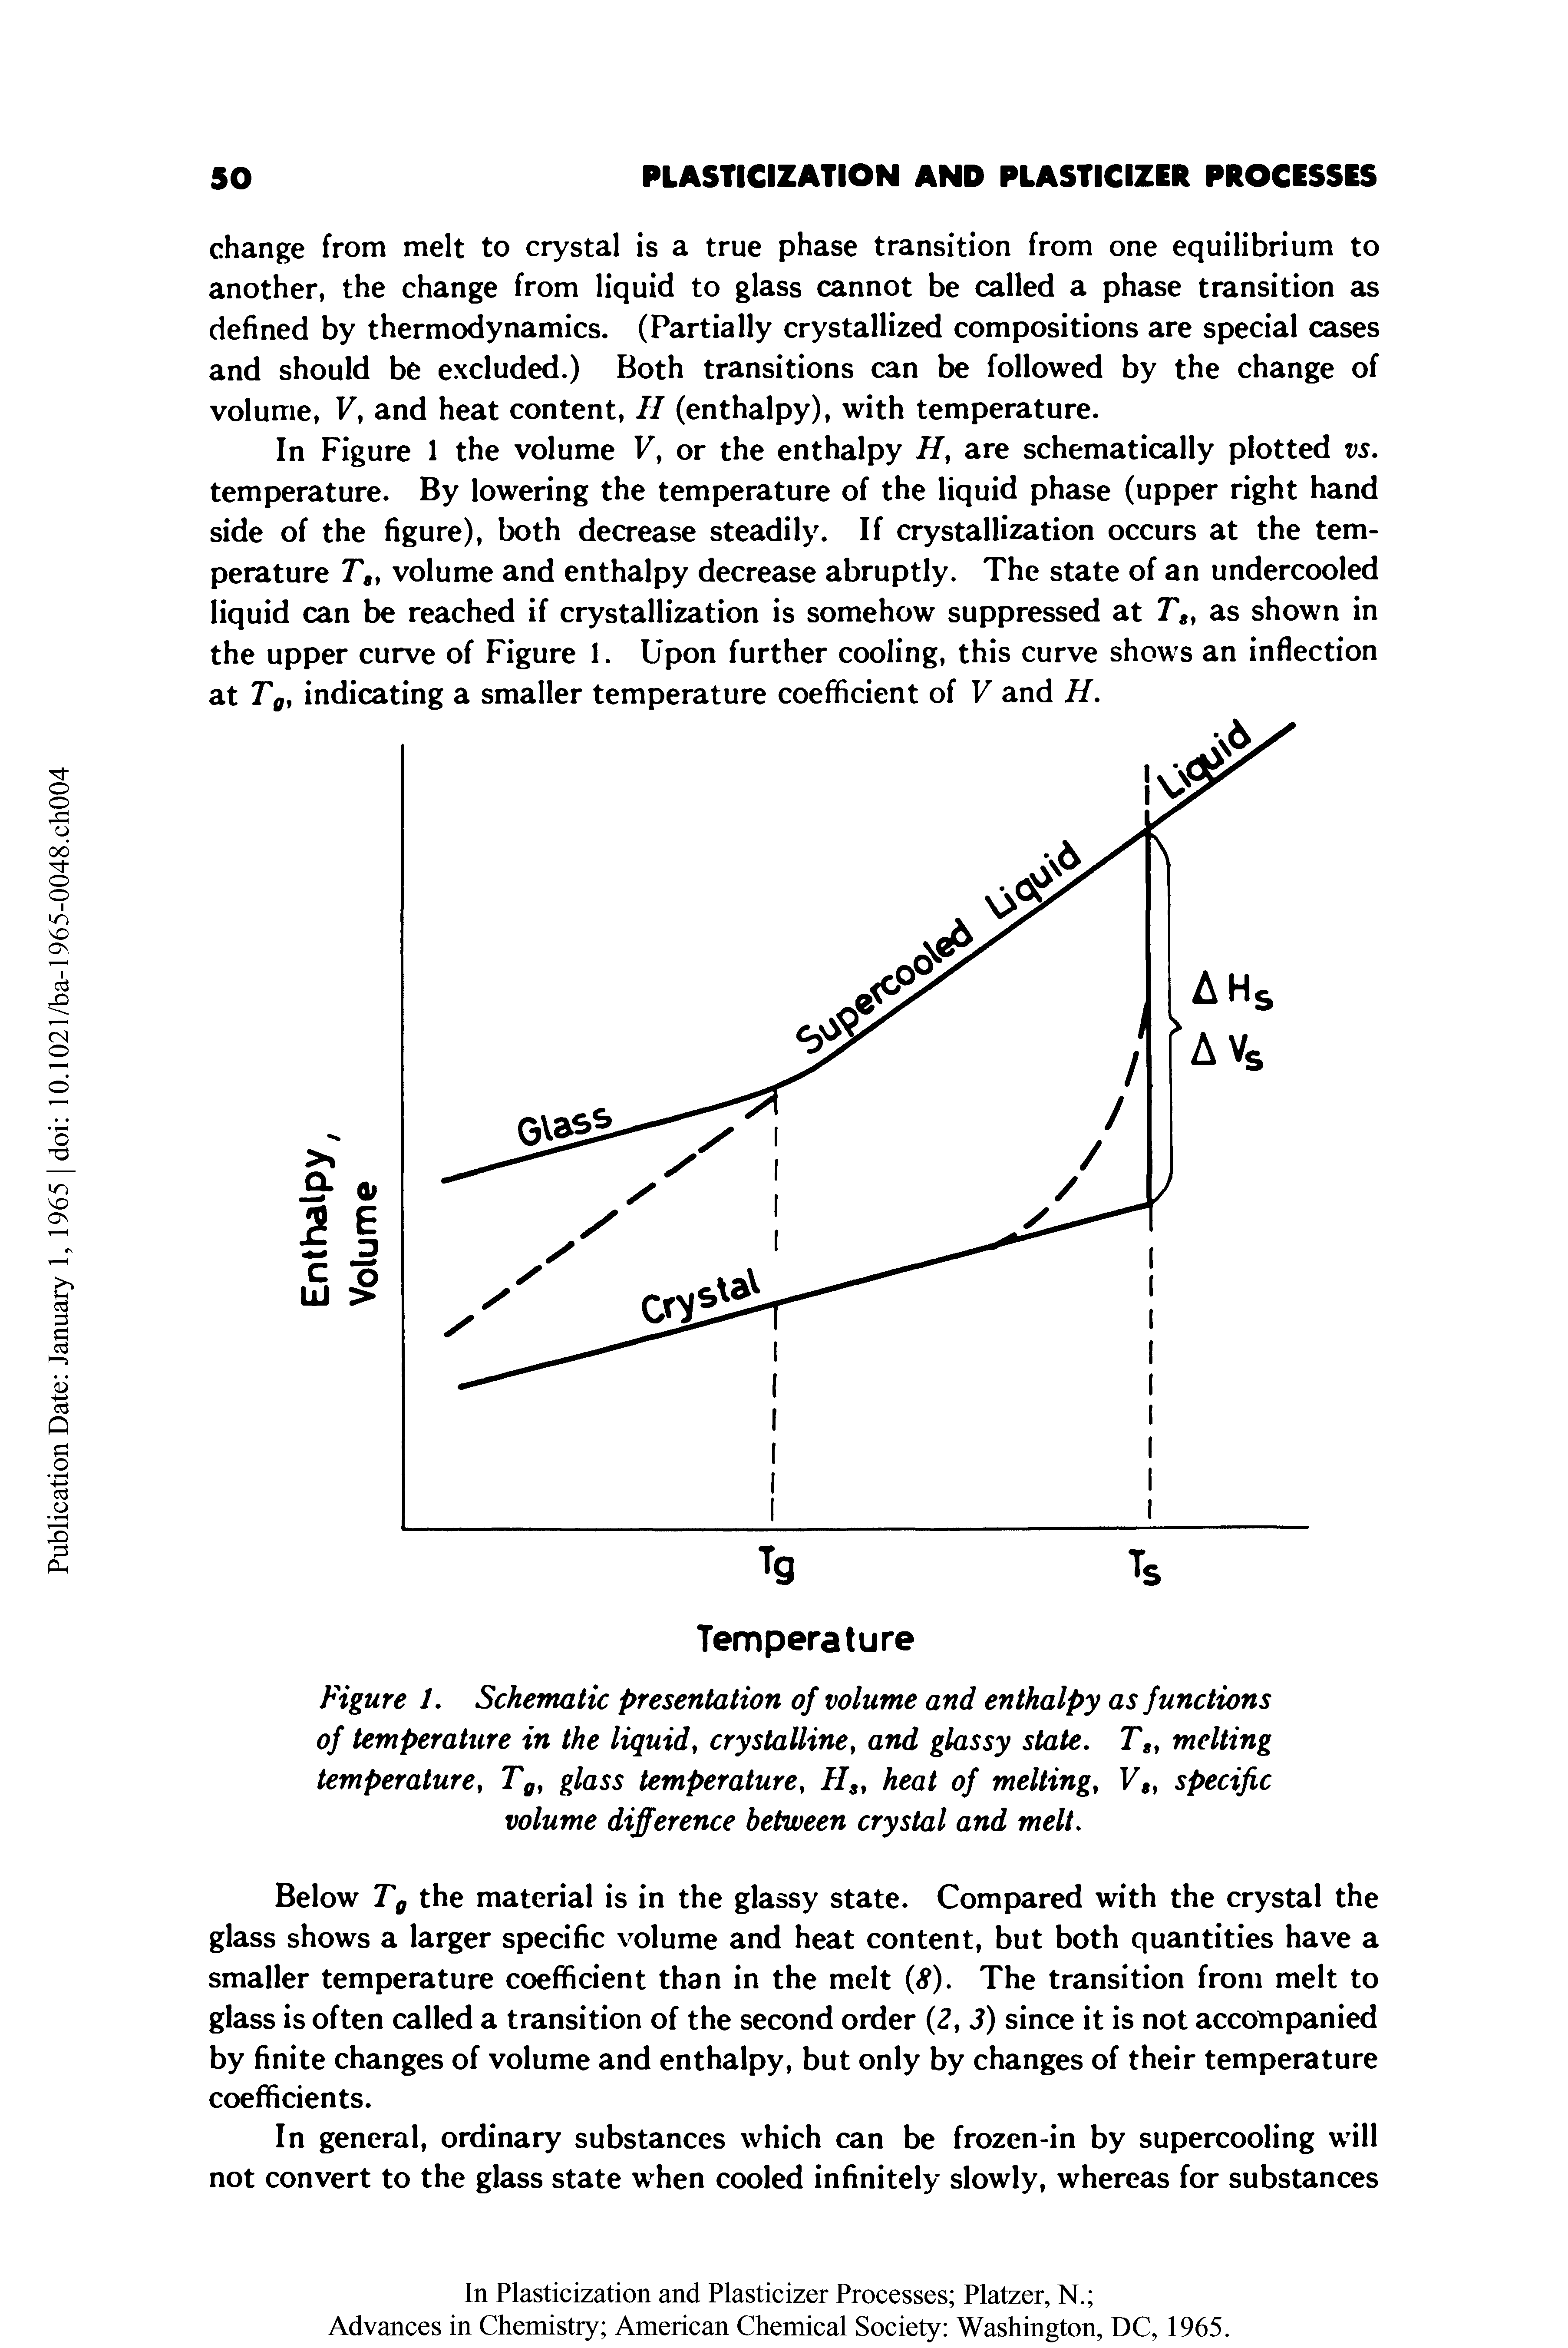 Figure 1. Schematic presentation of volume and enthalpy as functions of temperature in the liquid, crystalline, and glassy state. Tg, melting temperature, TQf glass temperature, IIs, heat of melting, V8, specific volume difference between crystal and melt.